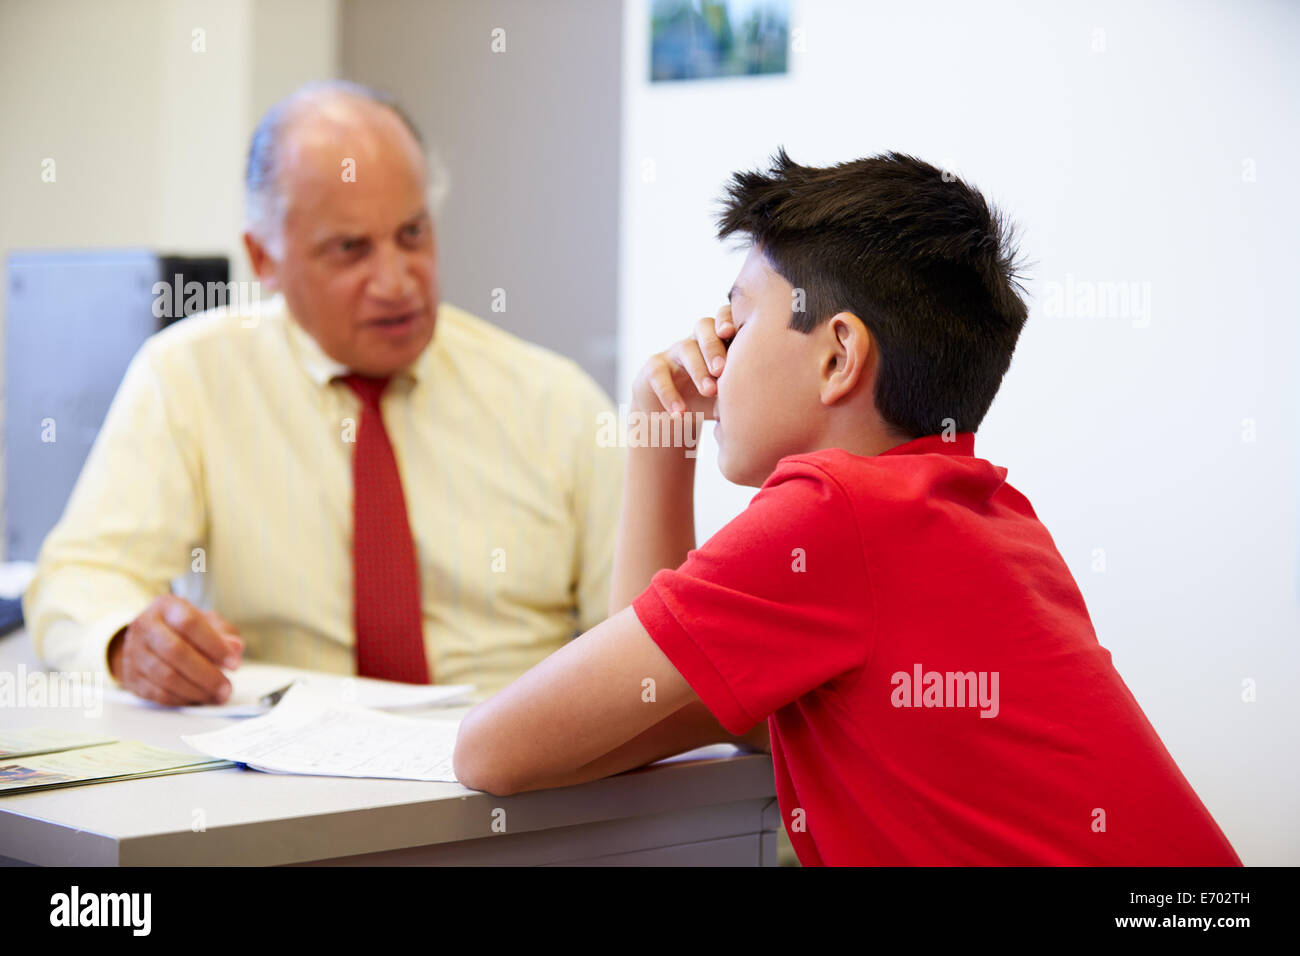 Male Student Talking To High School Counselor Stock Photo